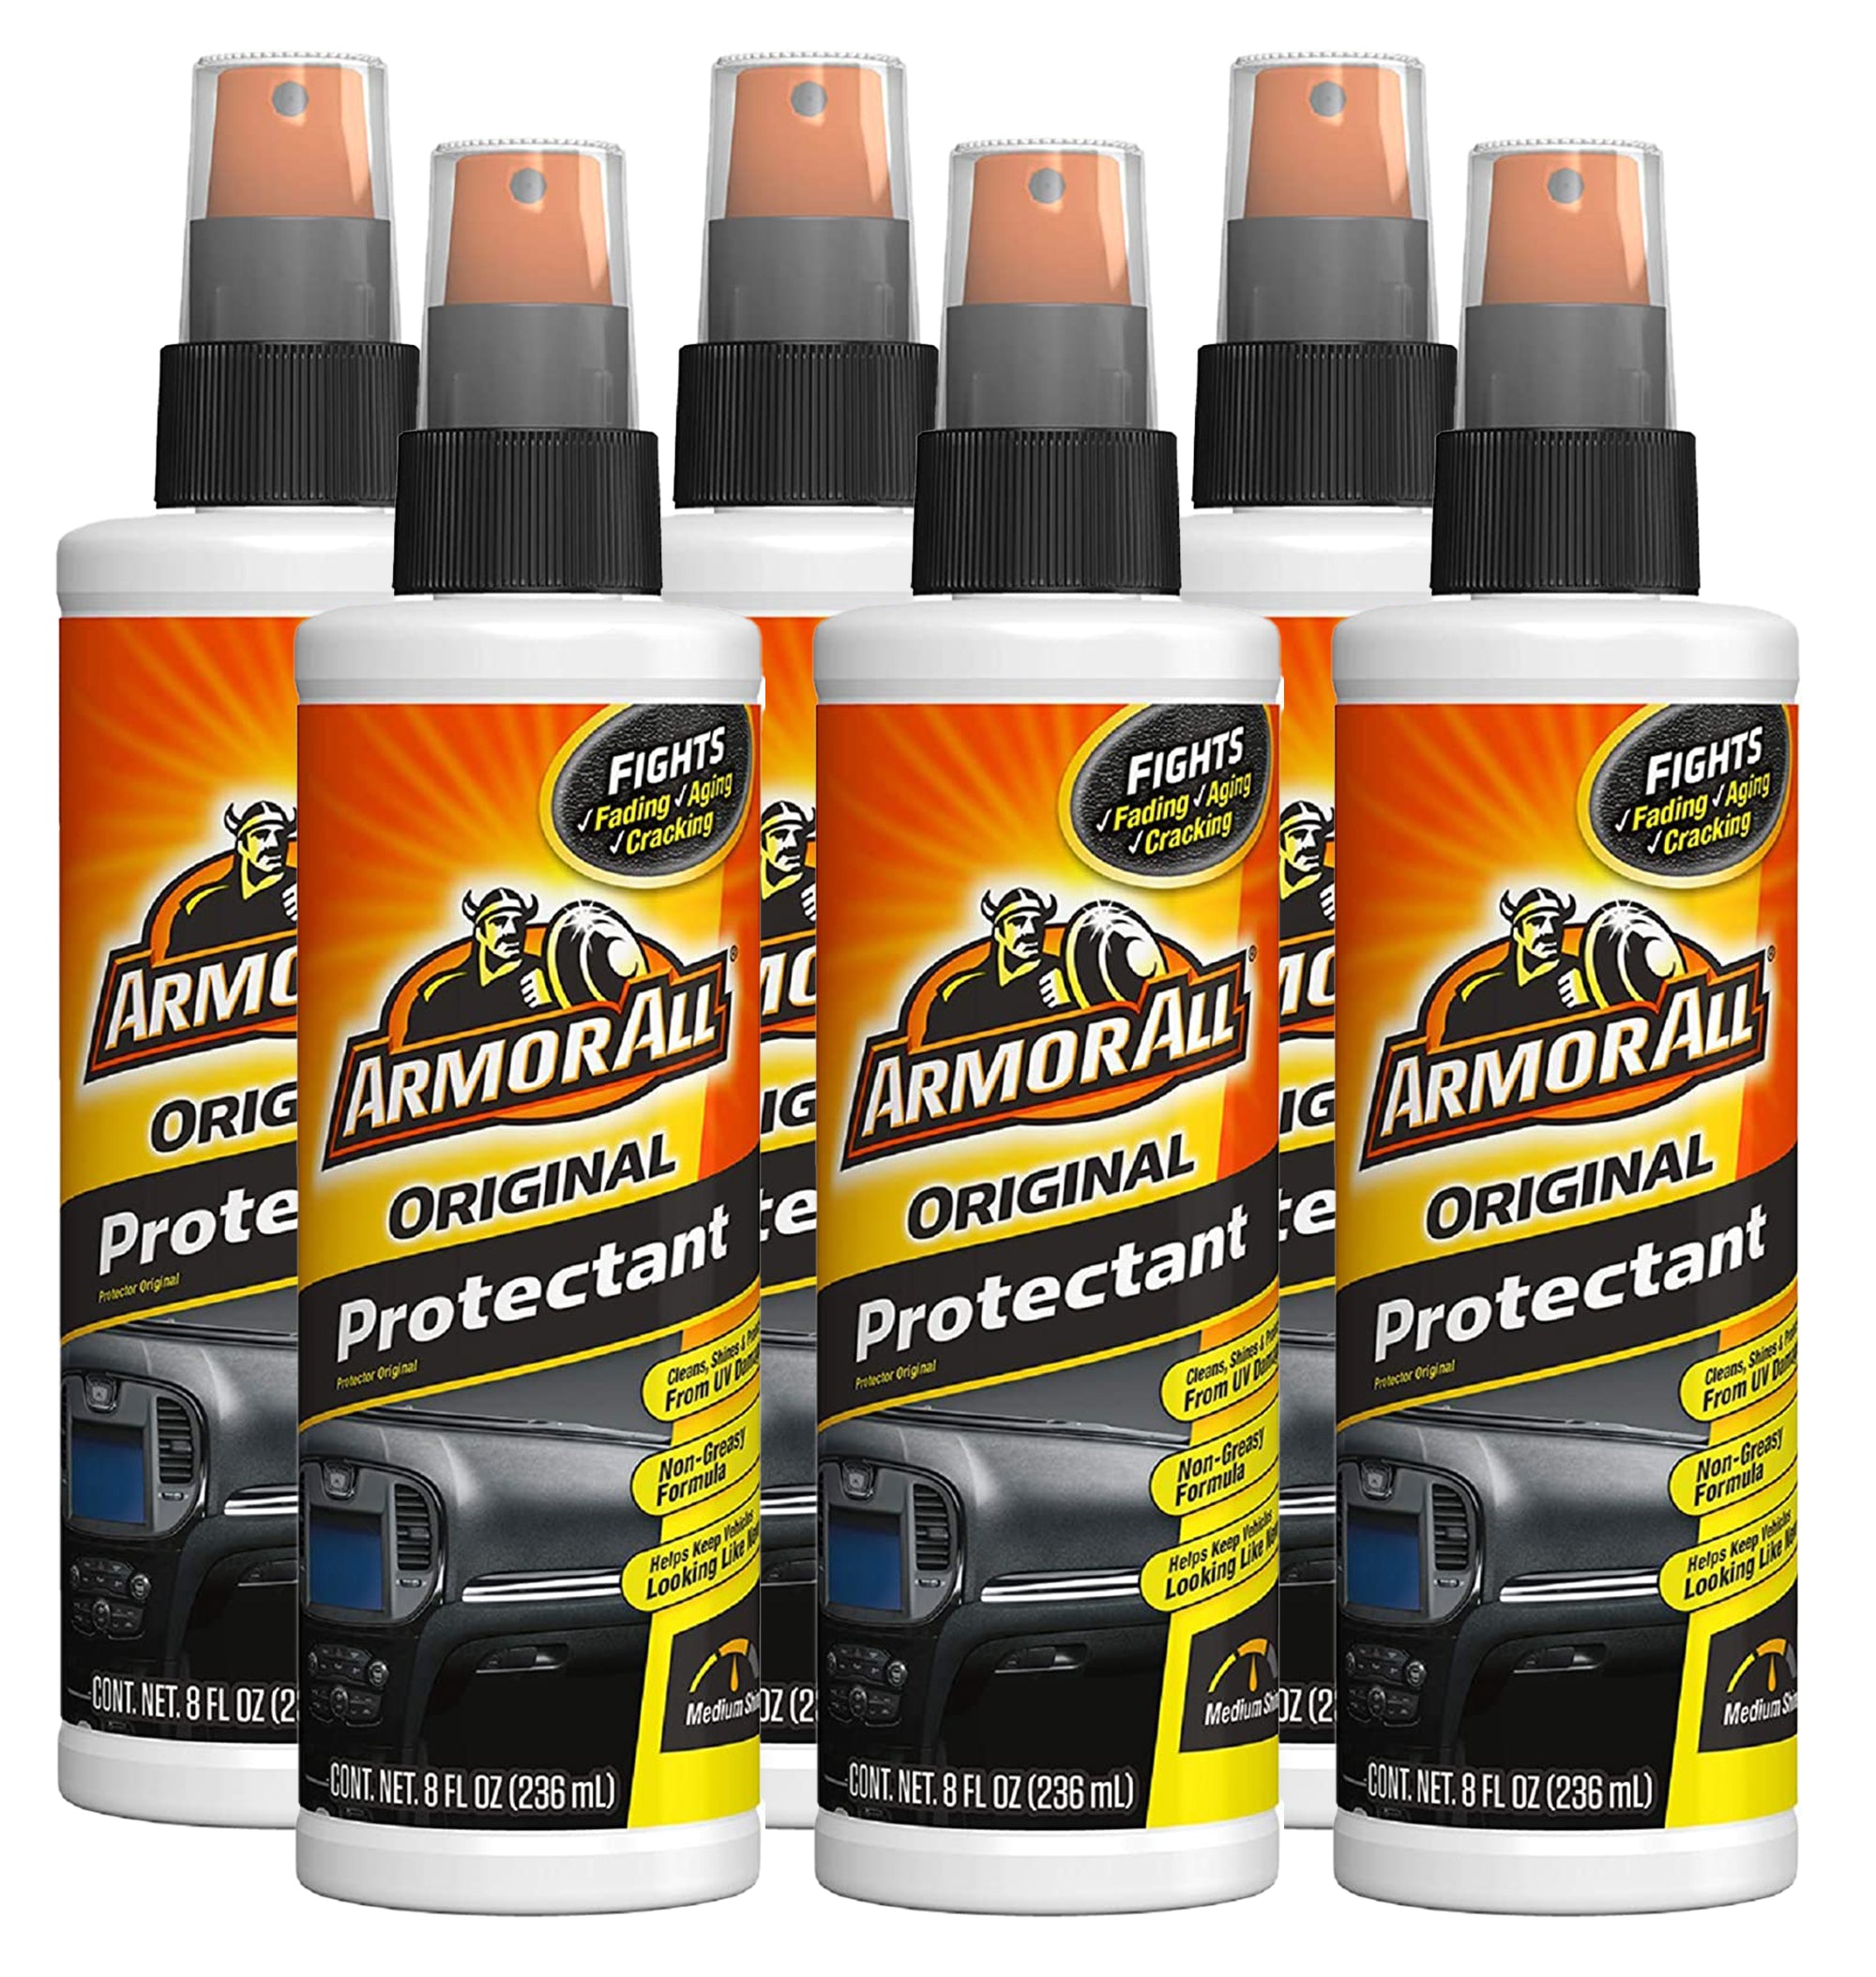 Original Protectant Spray by Armor All, Car Interior Cleaner with